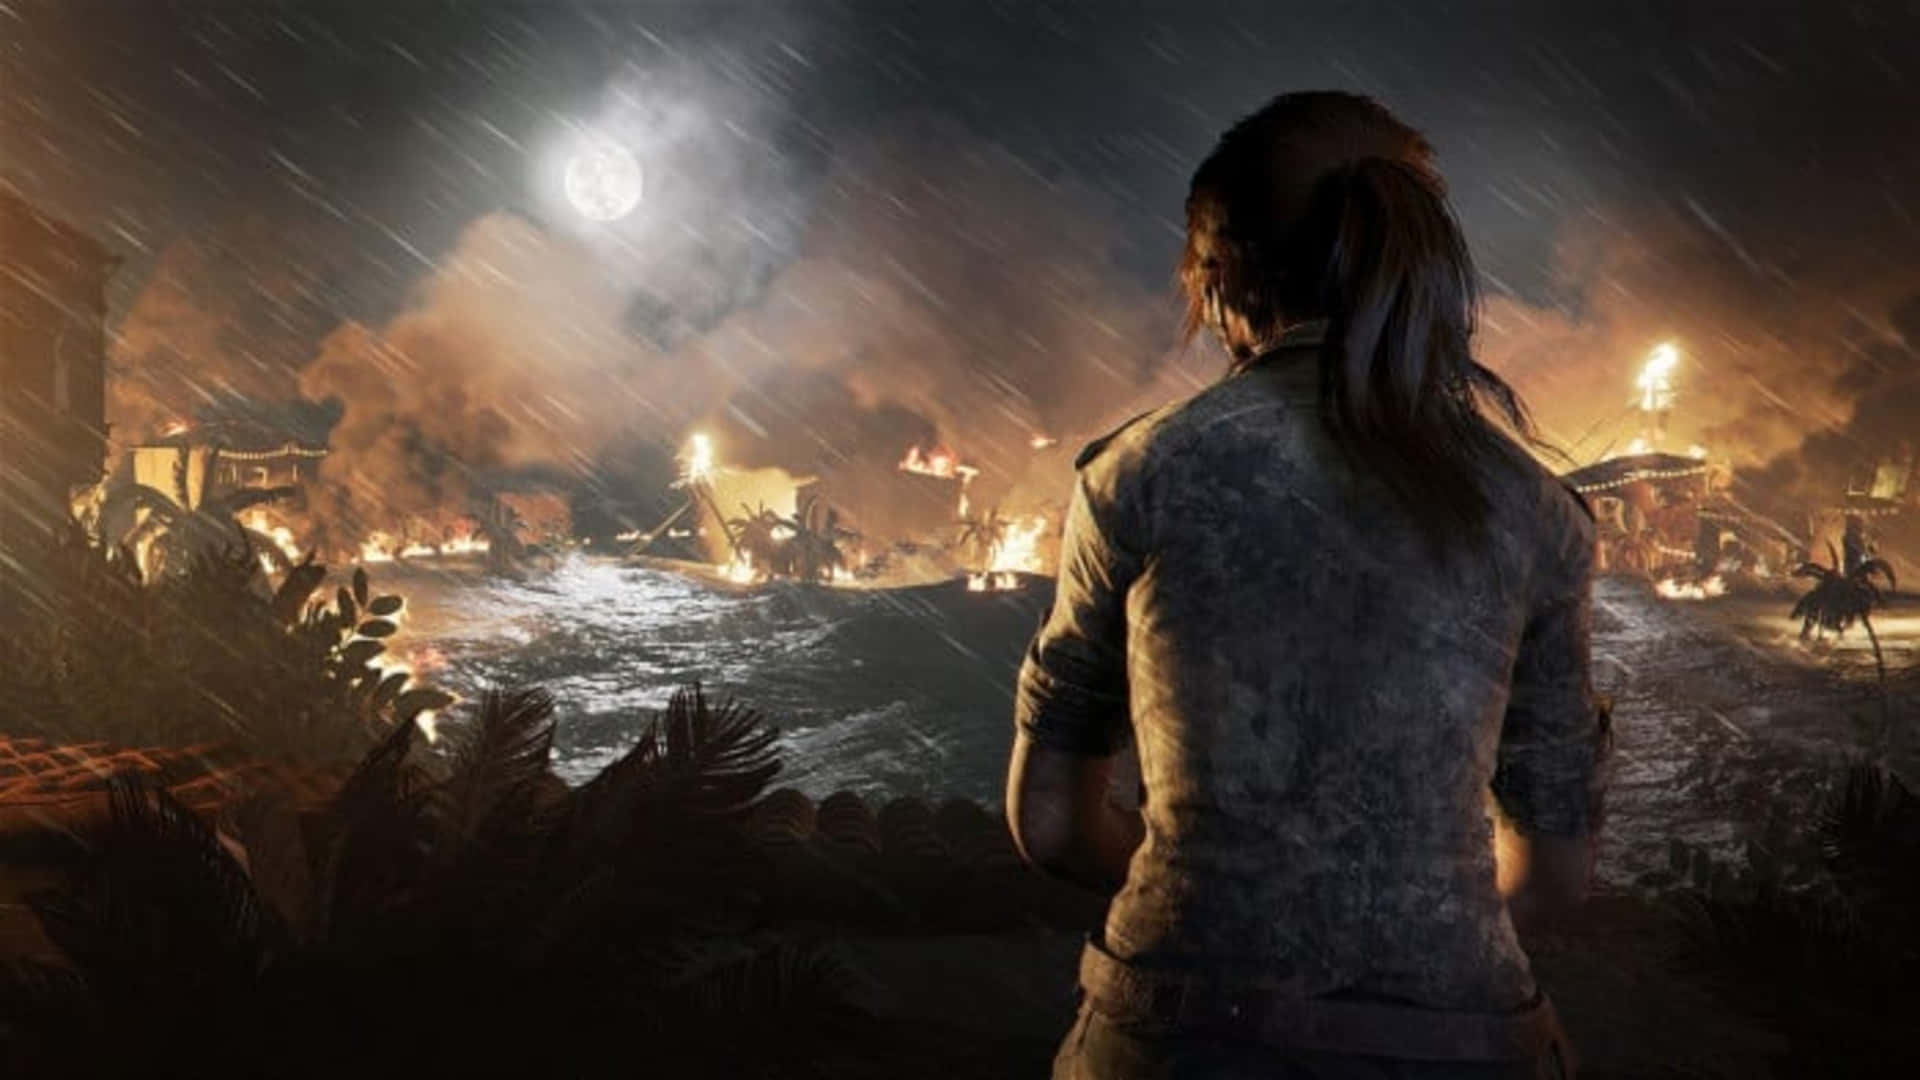 Tomb Raider - Experience the thrill of an explorer on a journey of discovery